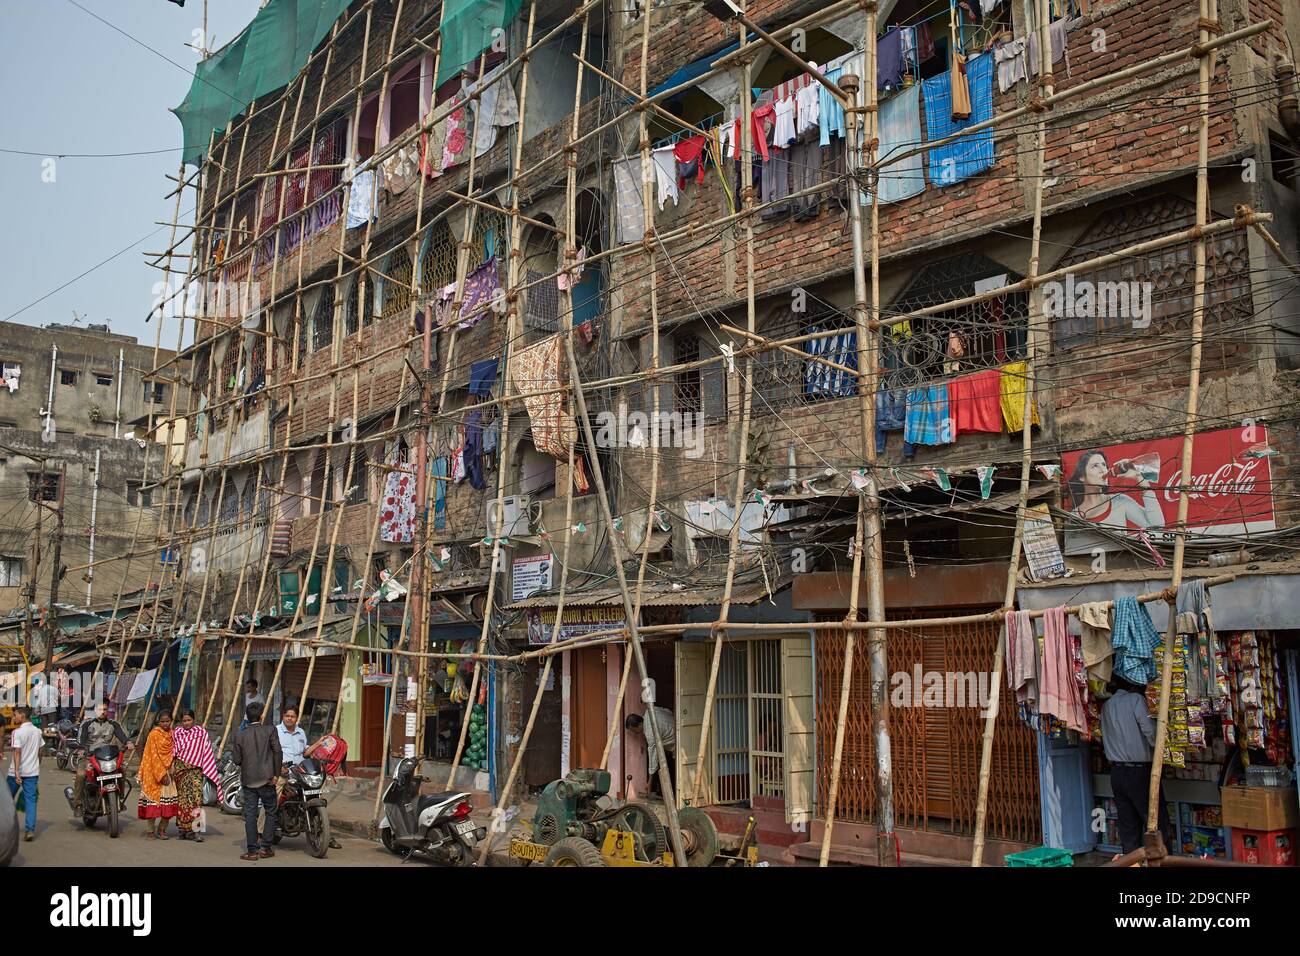 Kolkata, India, January 2016. A large bamboo scaffold covering an old building. Stock Photo